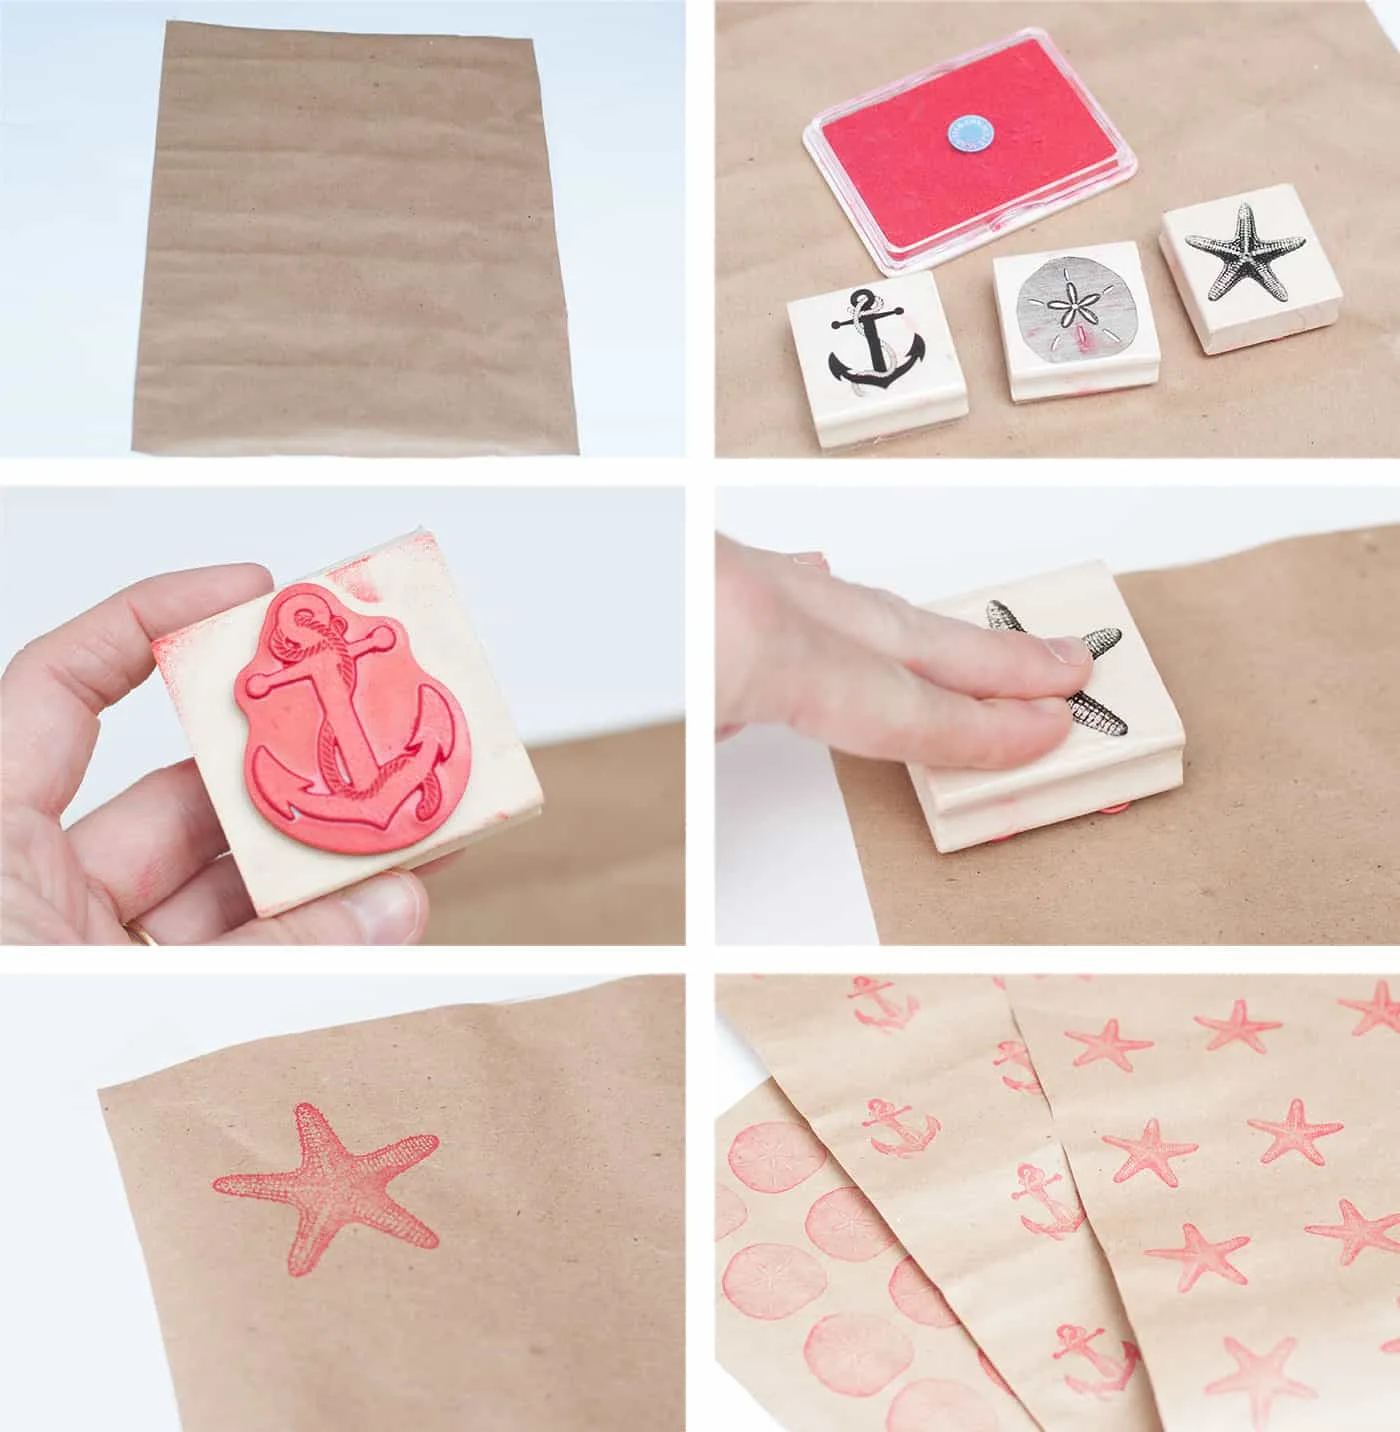 Stamping with stamps using red ink on brown kraft paper